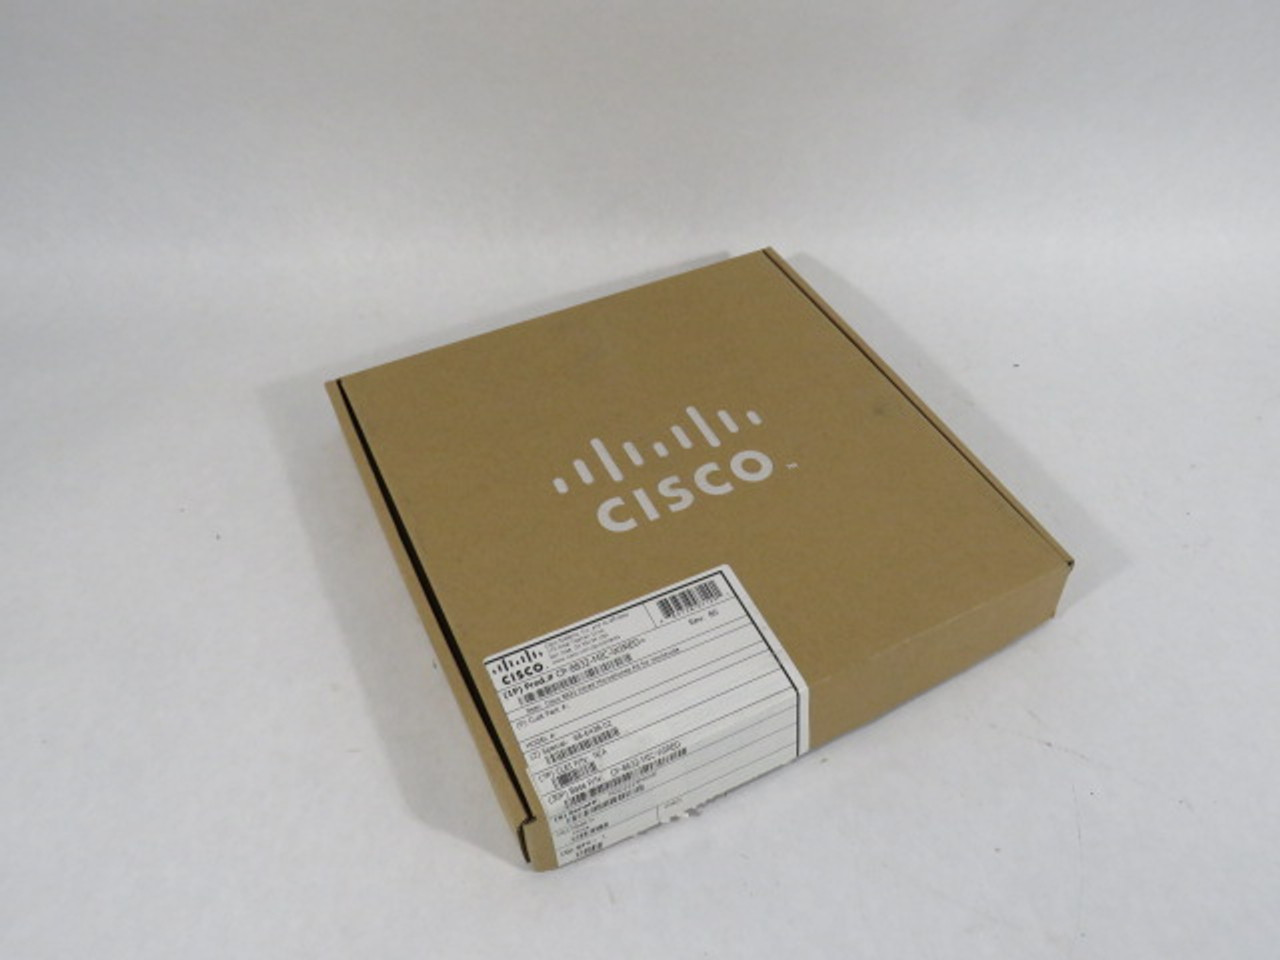 Cisco CP-8832-MIC-WIRED Silver Microphone Kit for IP Conference 2-Pack ! NEW !